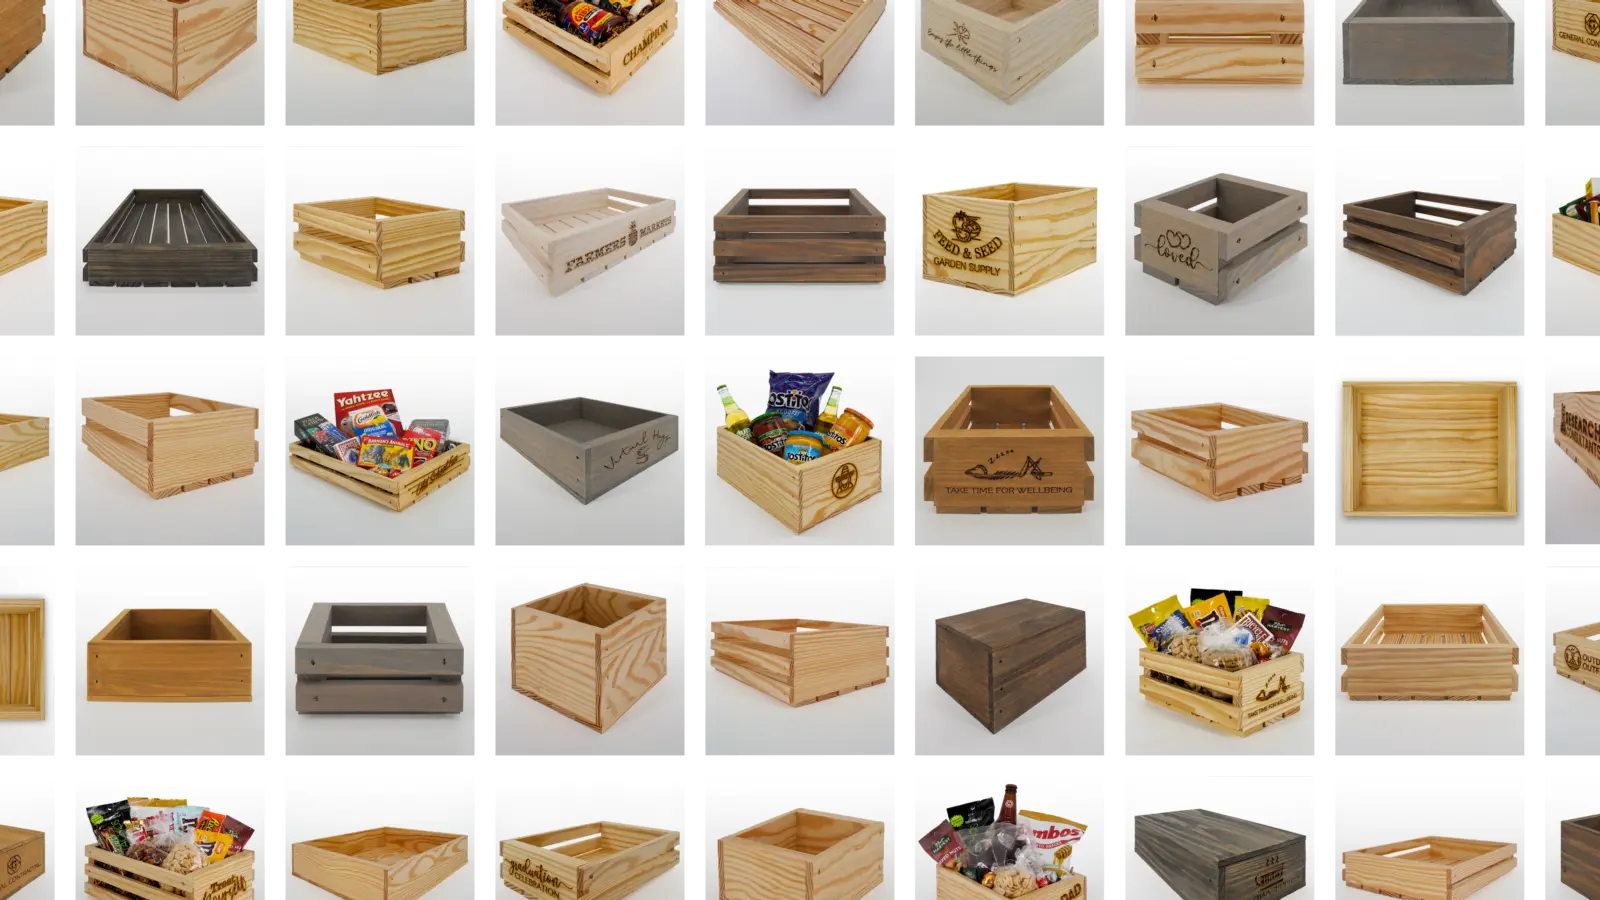 A wide selection of gift crates and boxes by Carpenter Core